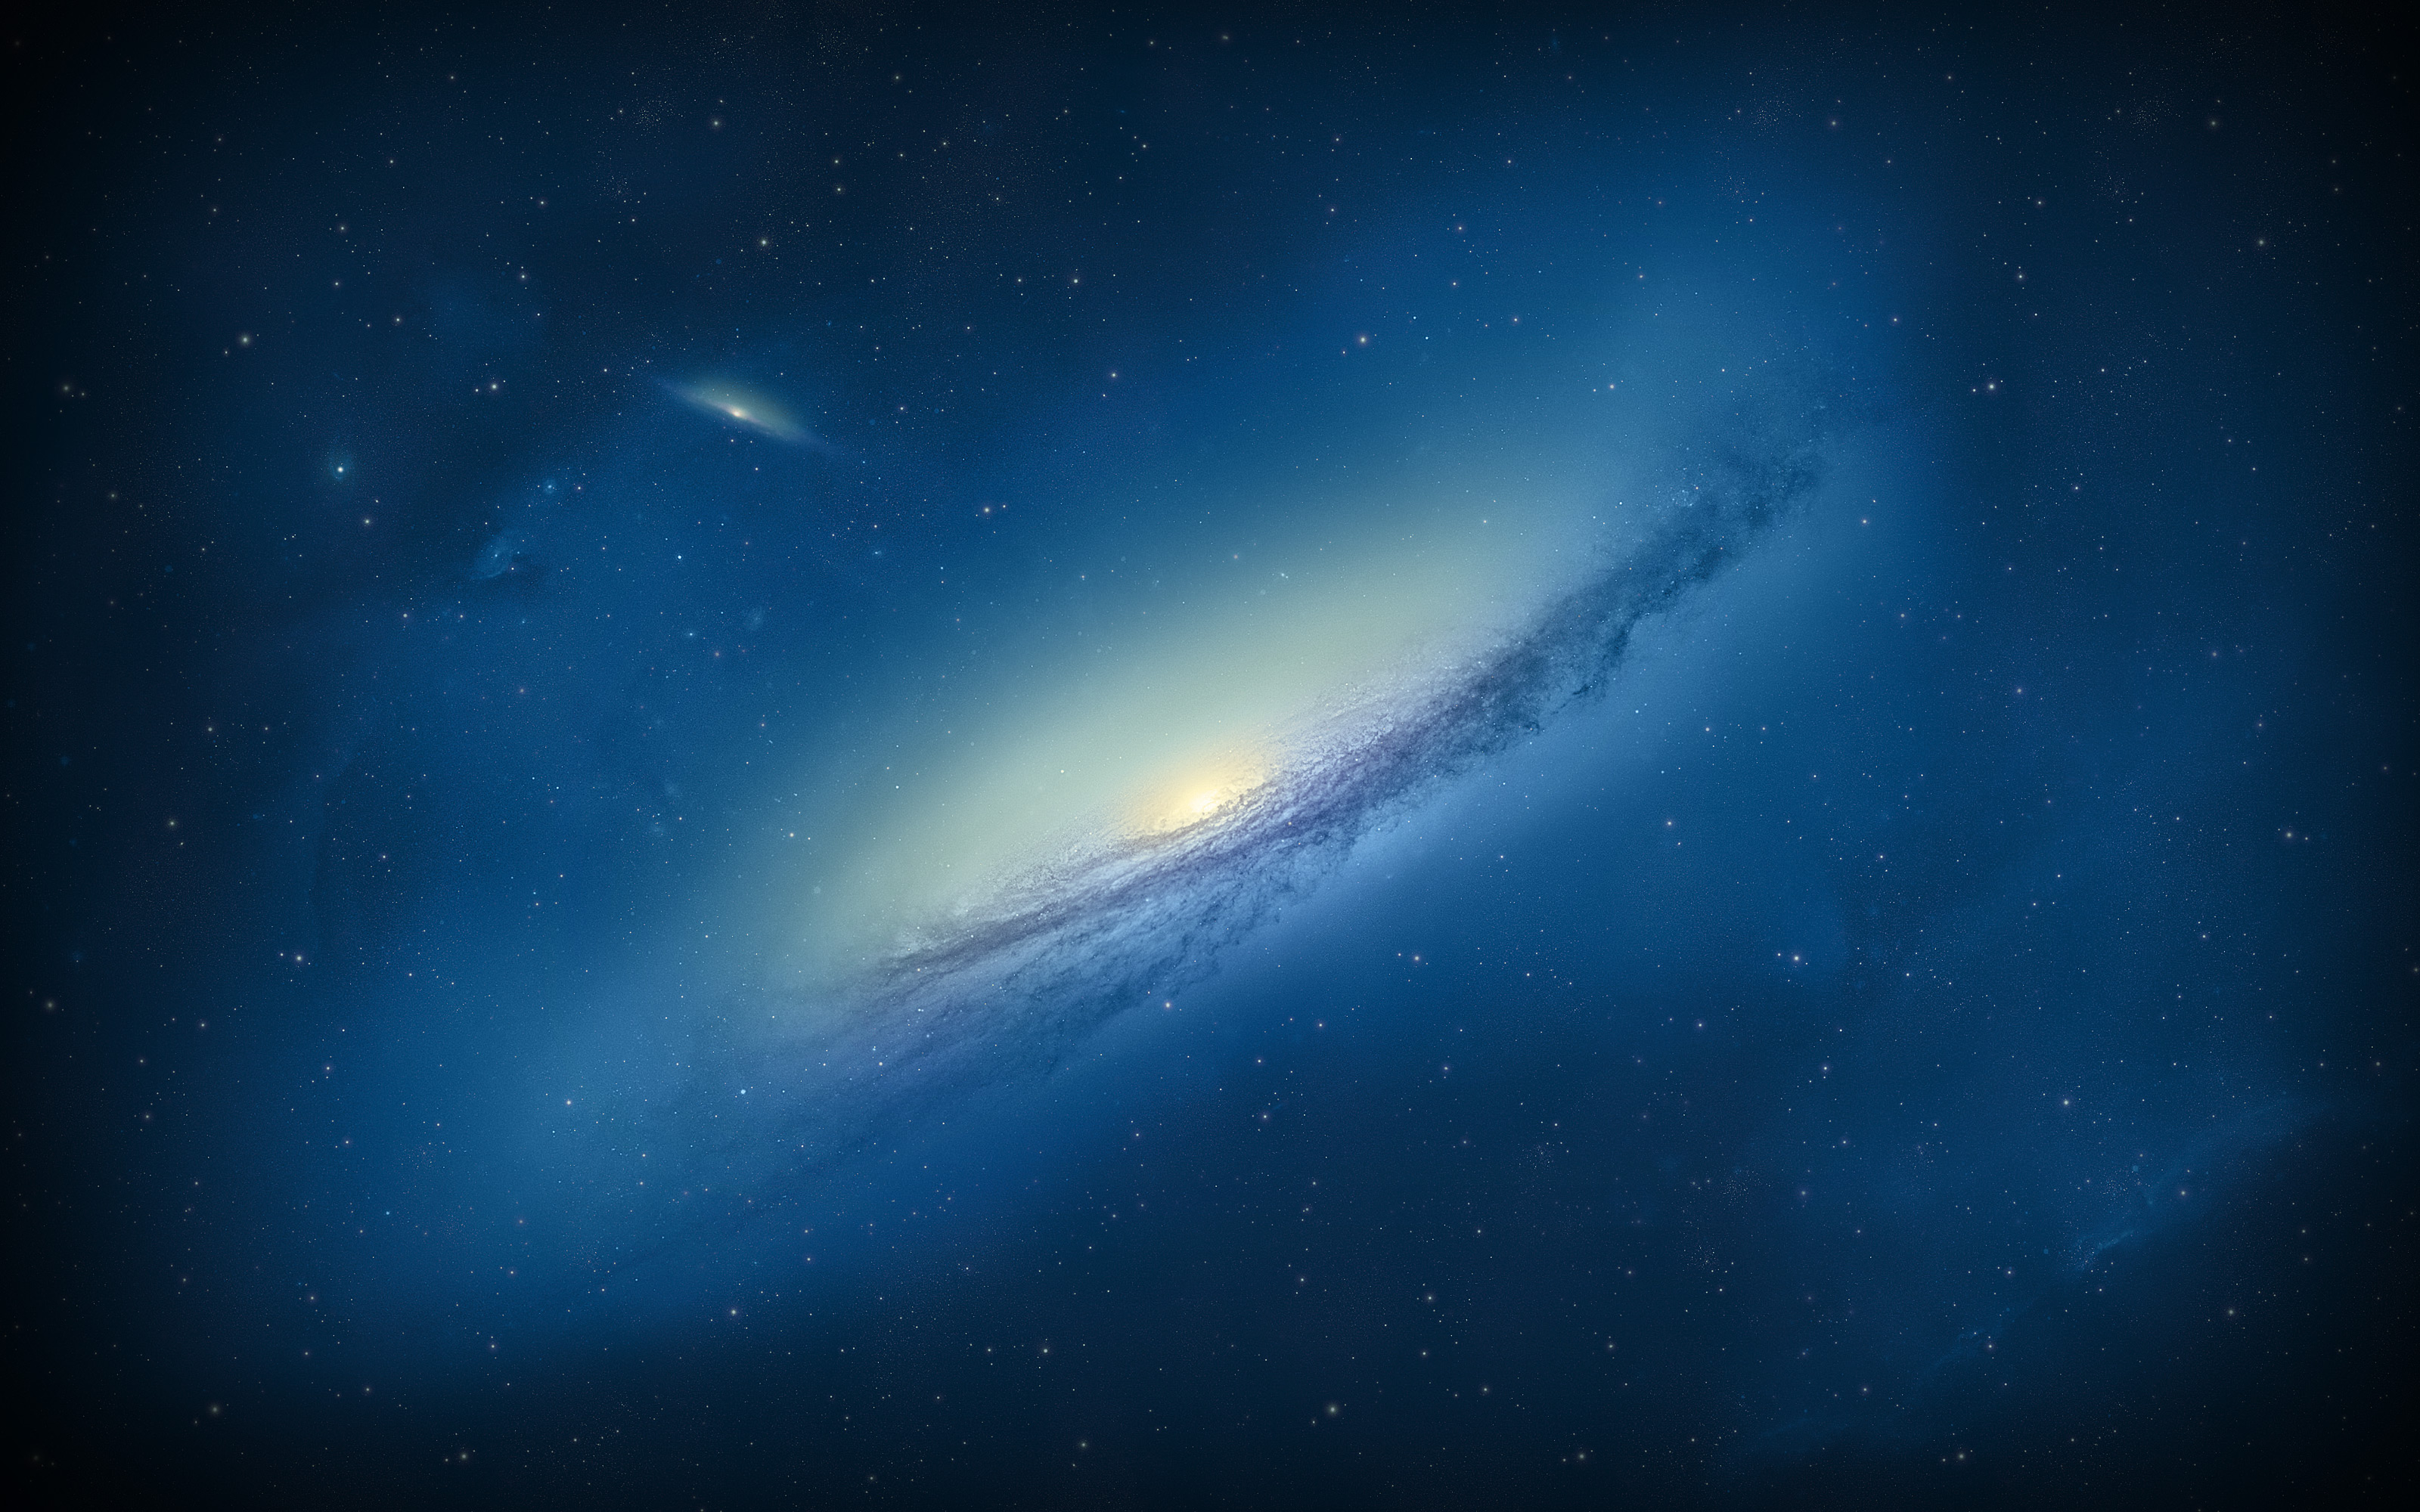 Andromeda Galaxy M31 Free Wallpaper HD Uploaded By 3190